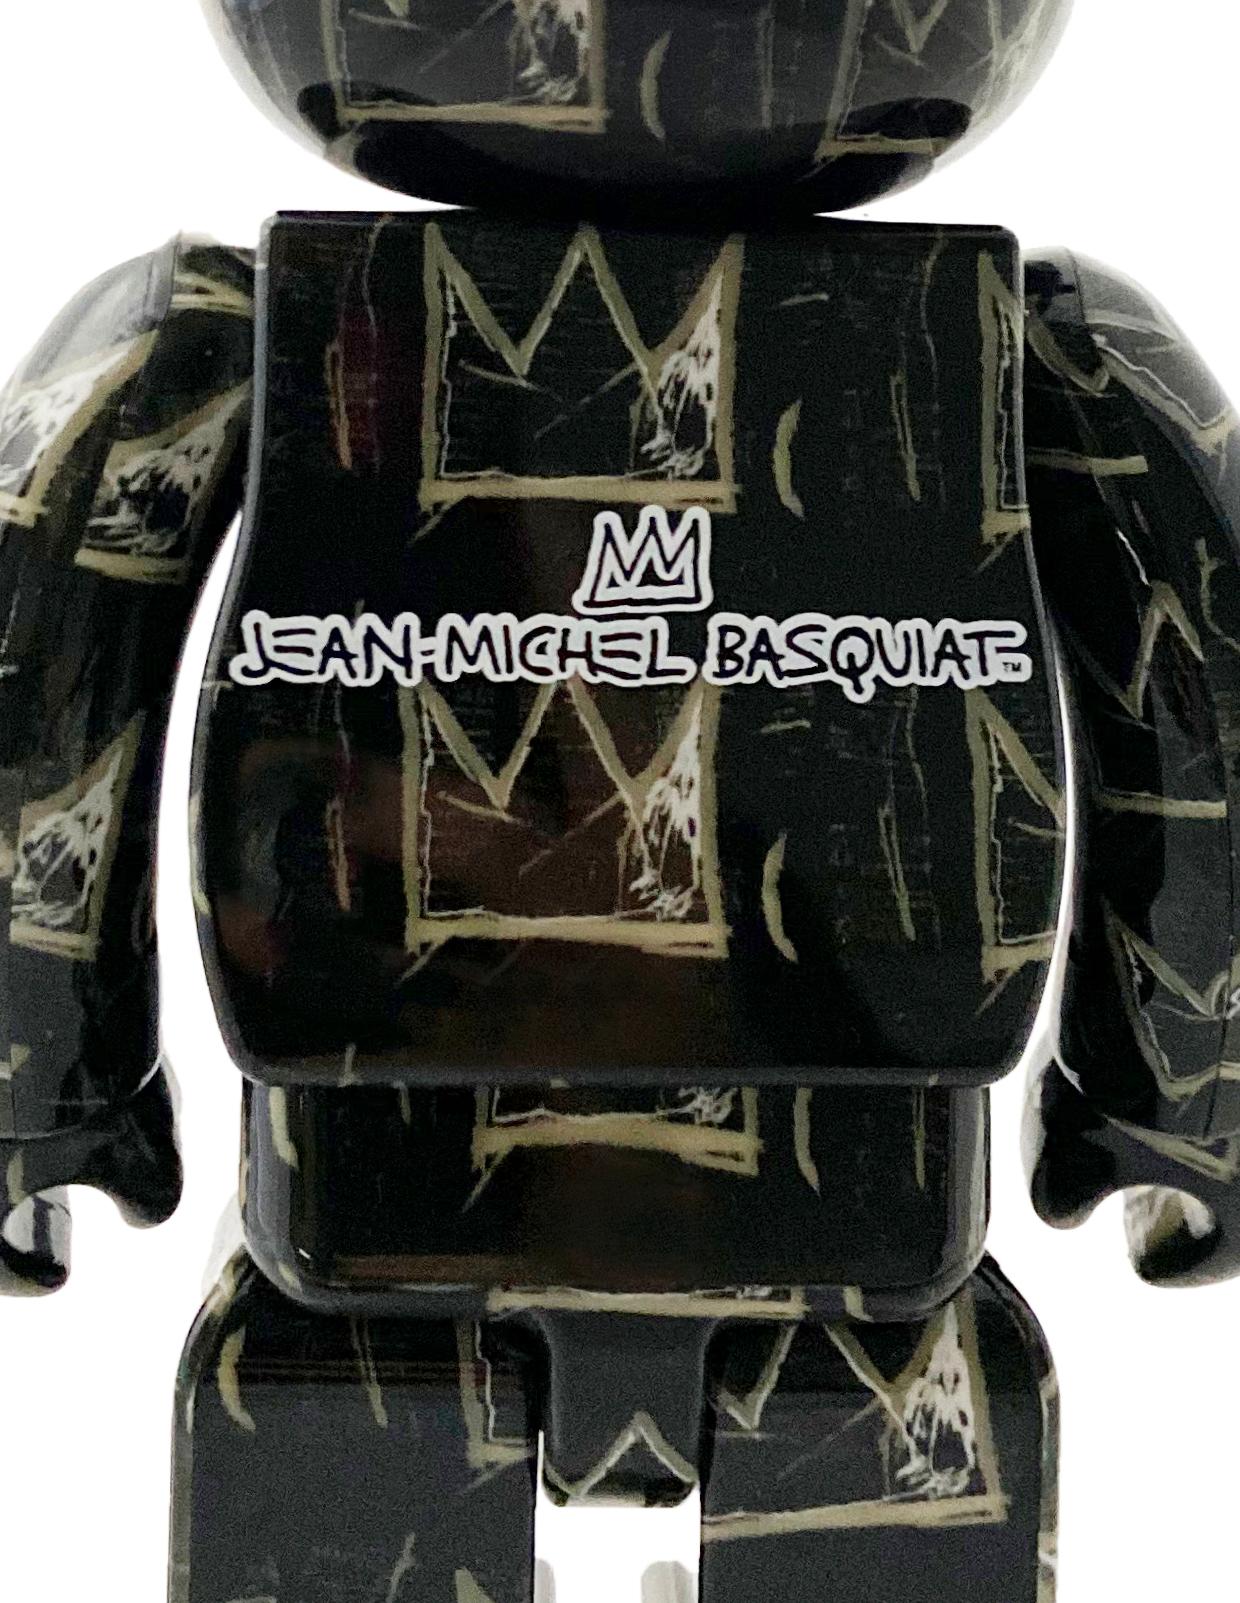 Jean-Michel Basquiat & Keith Haring  400% Bearbrick Vinyl Figures: Set of two individual works:

Unique, timeless collectibles trademarked & licensed by the Estate of Jean-Michel Basquiat & Keith Haring (each respectively). The partnered